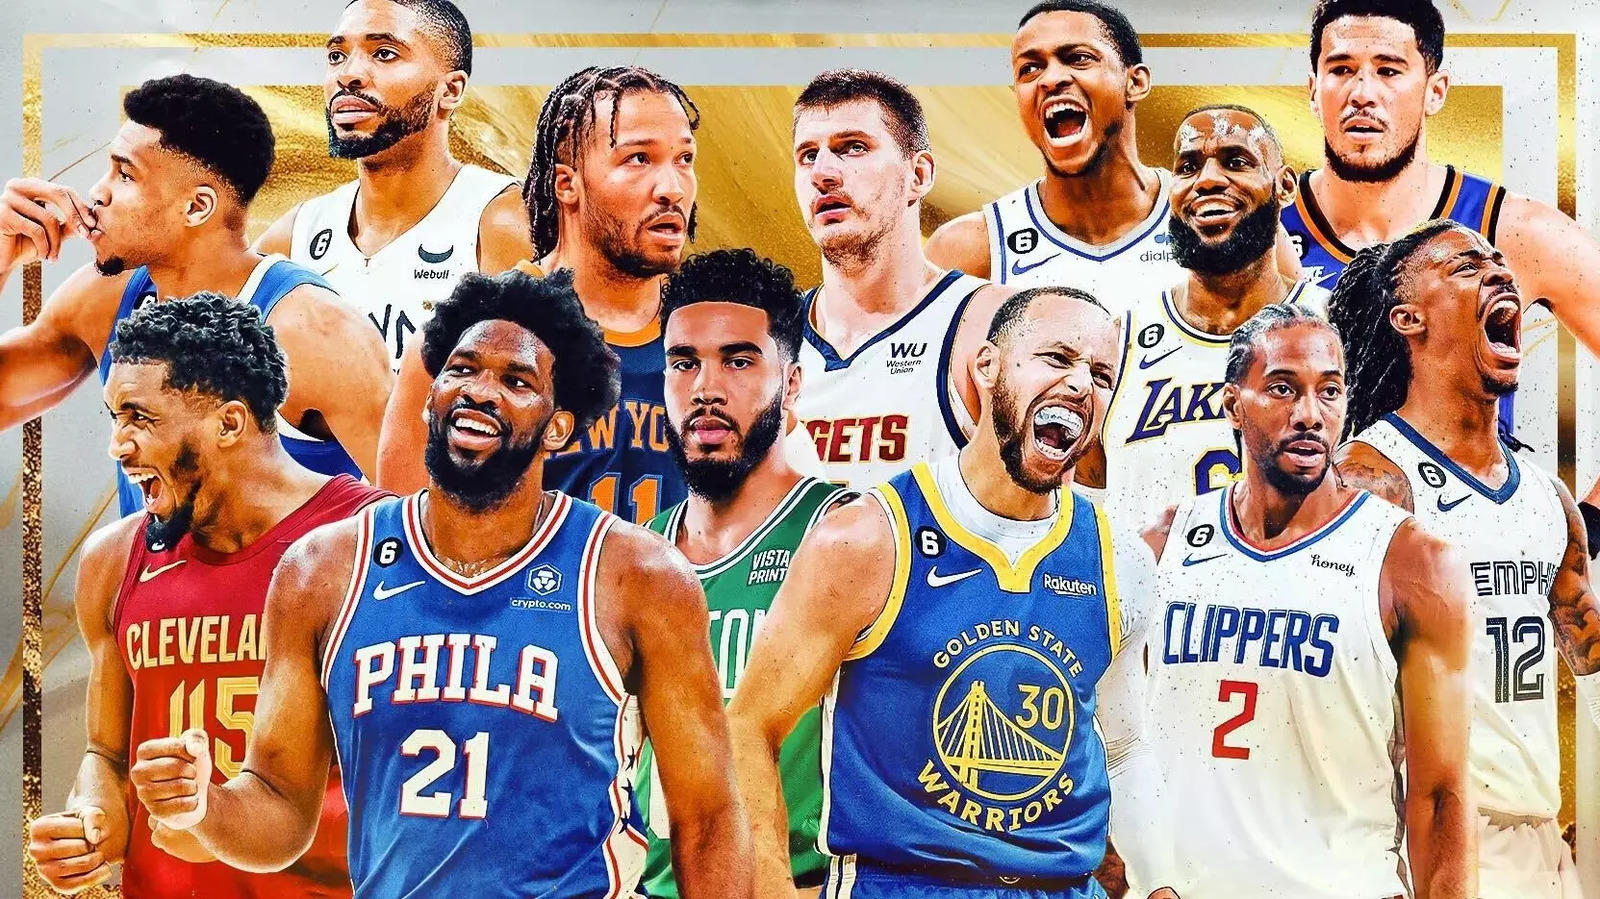 2022 NBA All-Star Game: Start time, players, how to watch and stream